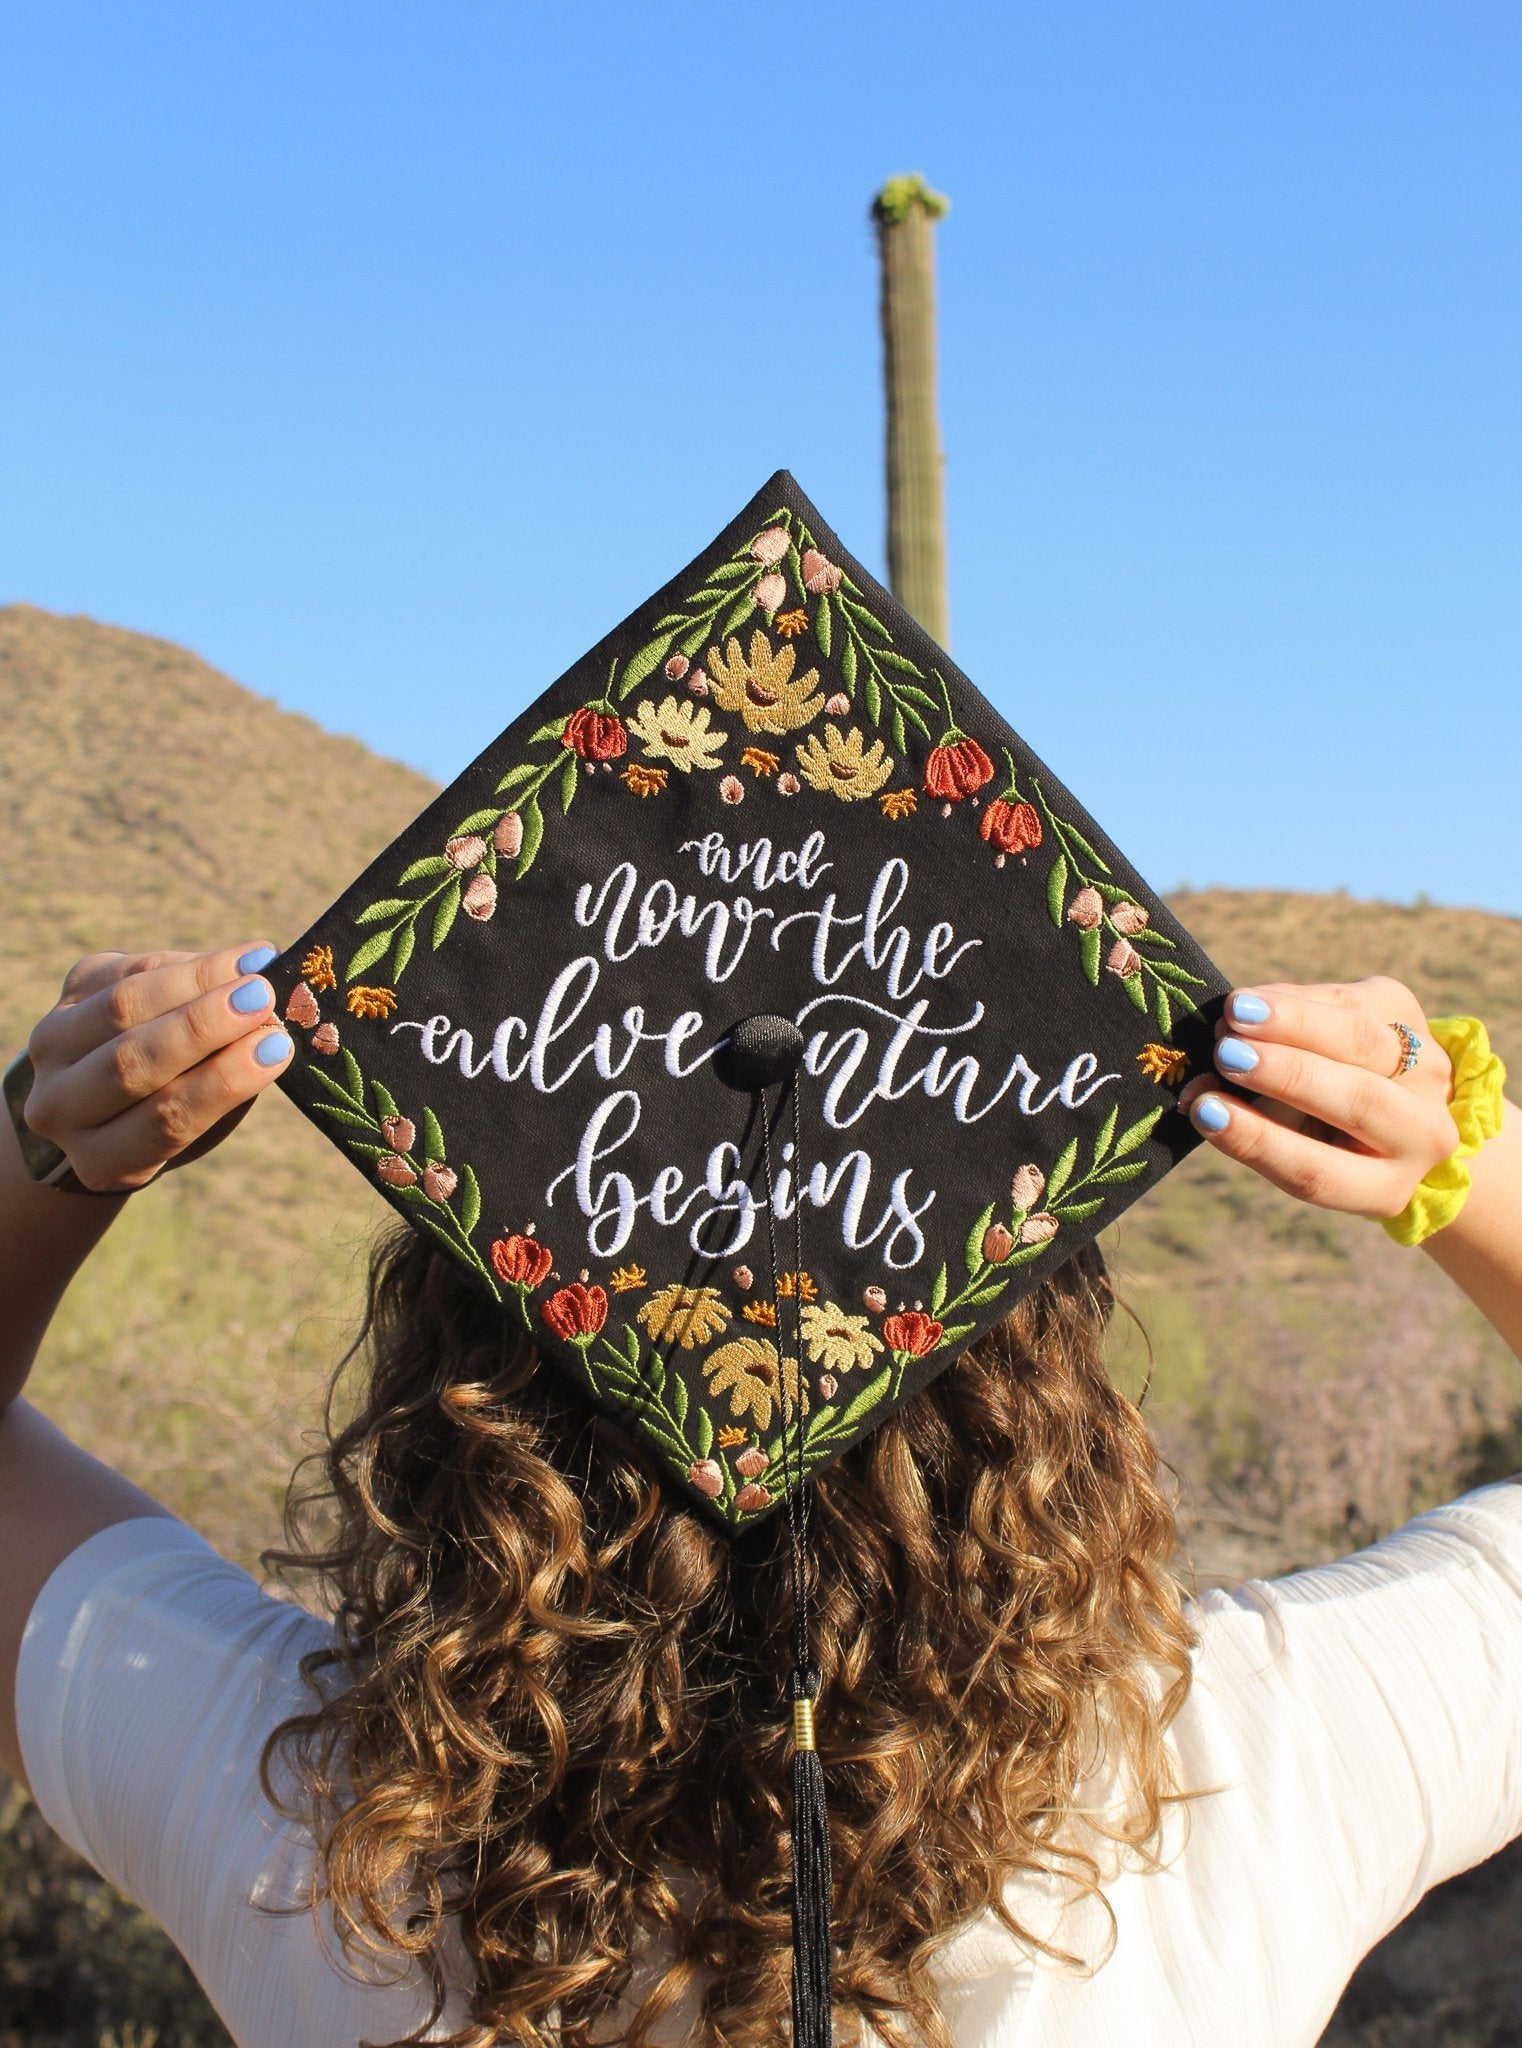 Ideas to Decorate Your Cap for Graduation